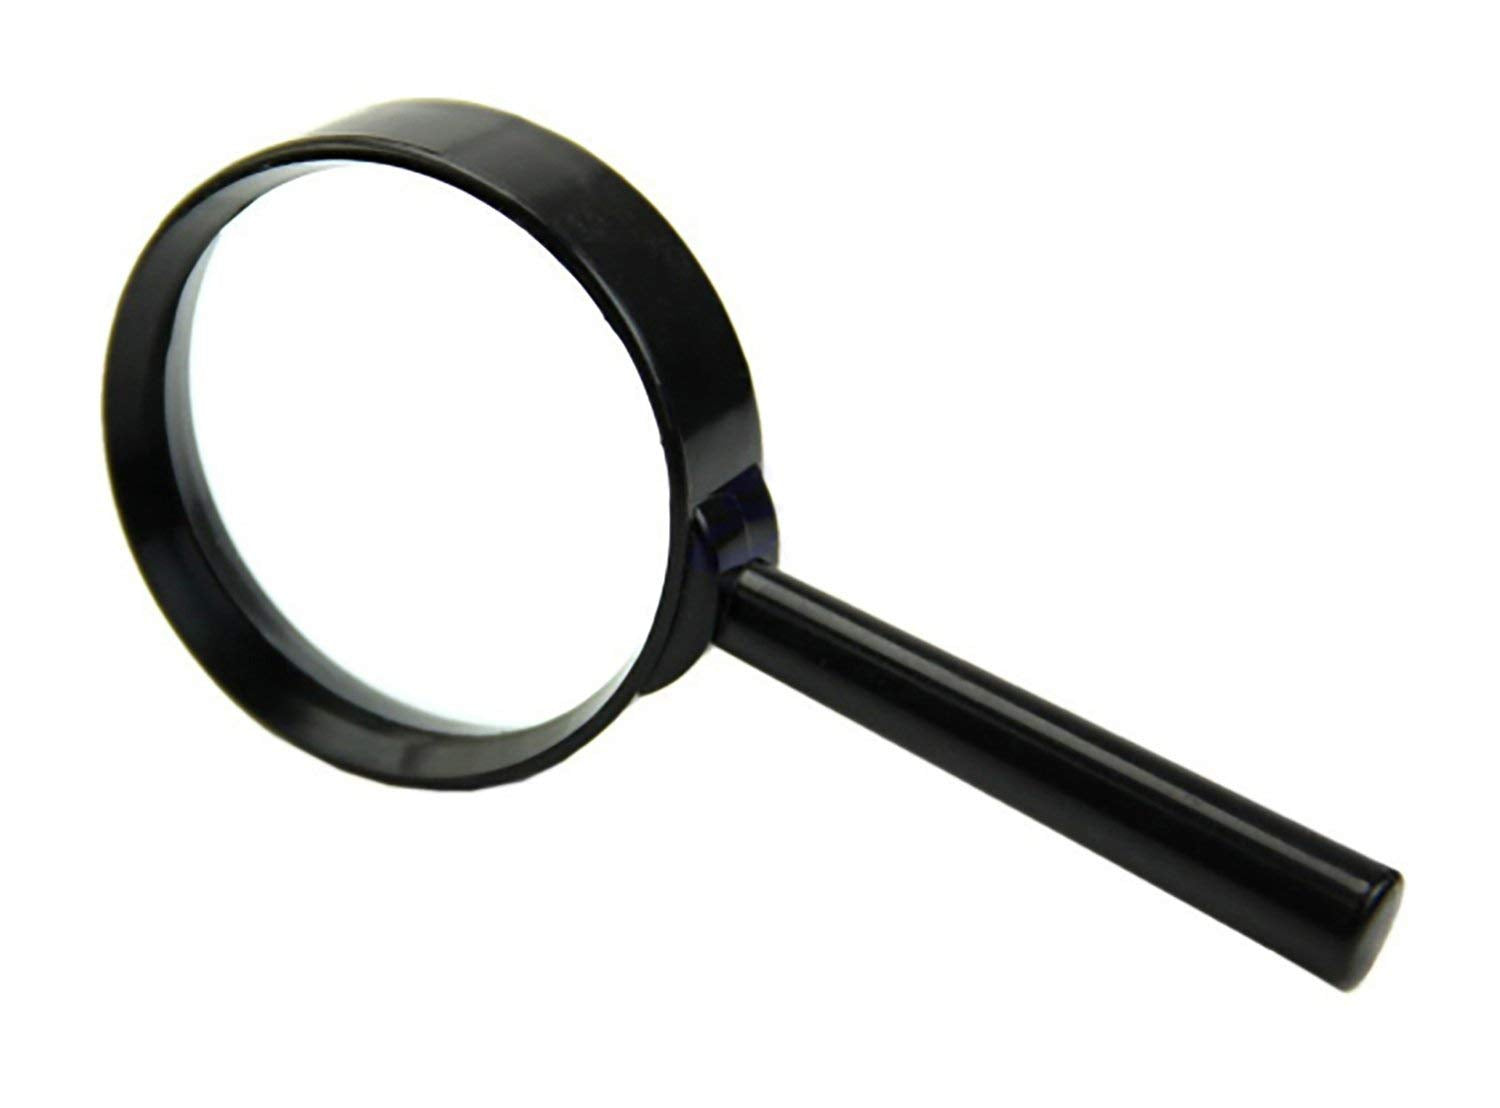 40mm Black Magnifying Glass for inspection, Jewelry & small prints rea –  McareSpareParts